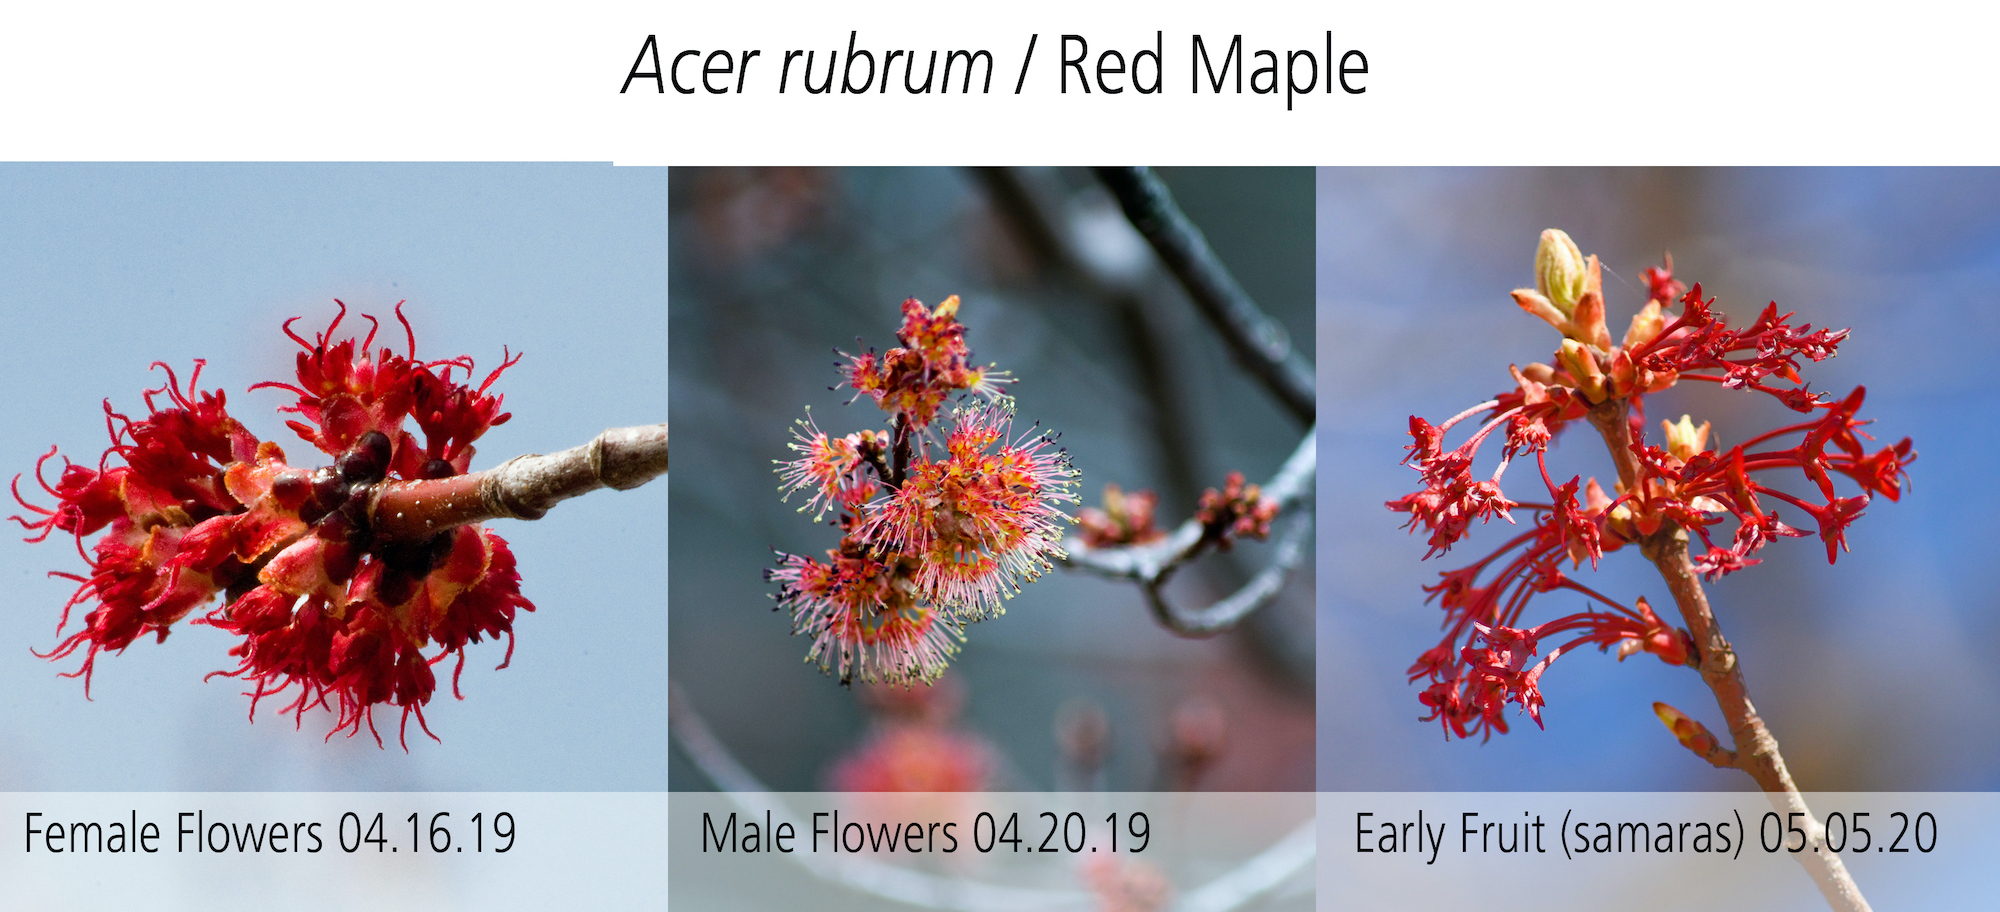 Red maple flowers and early samara